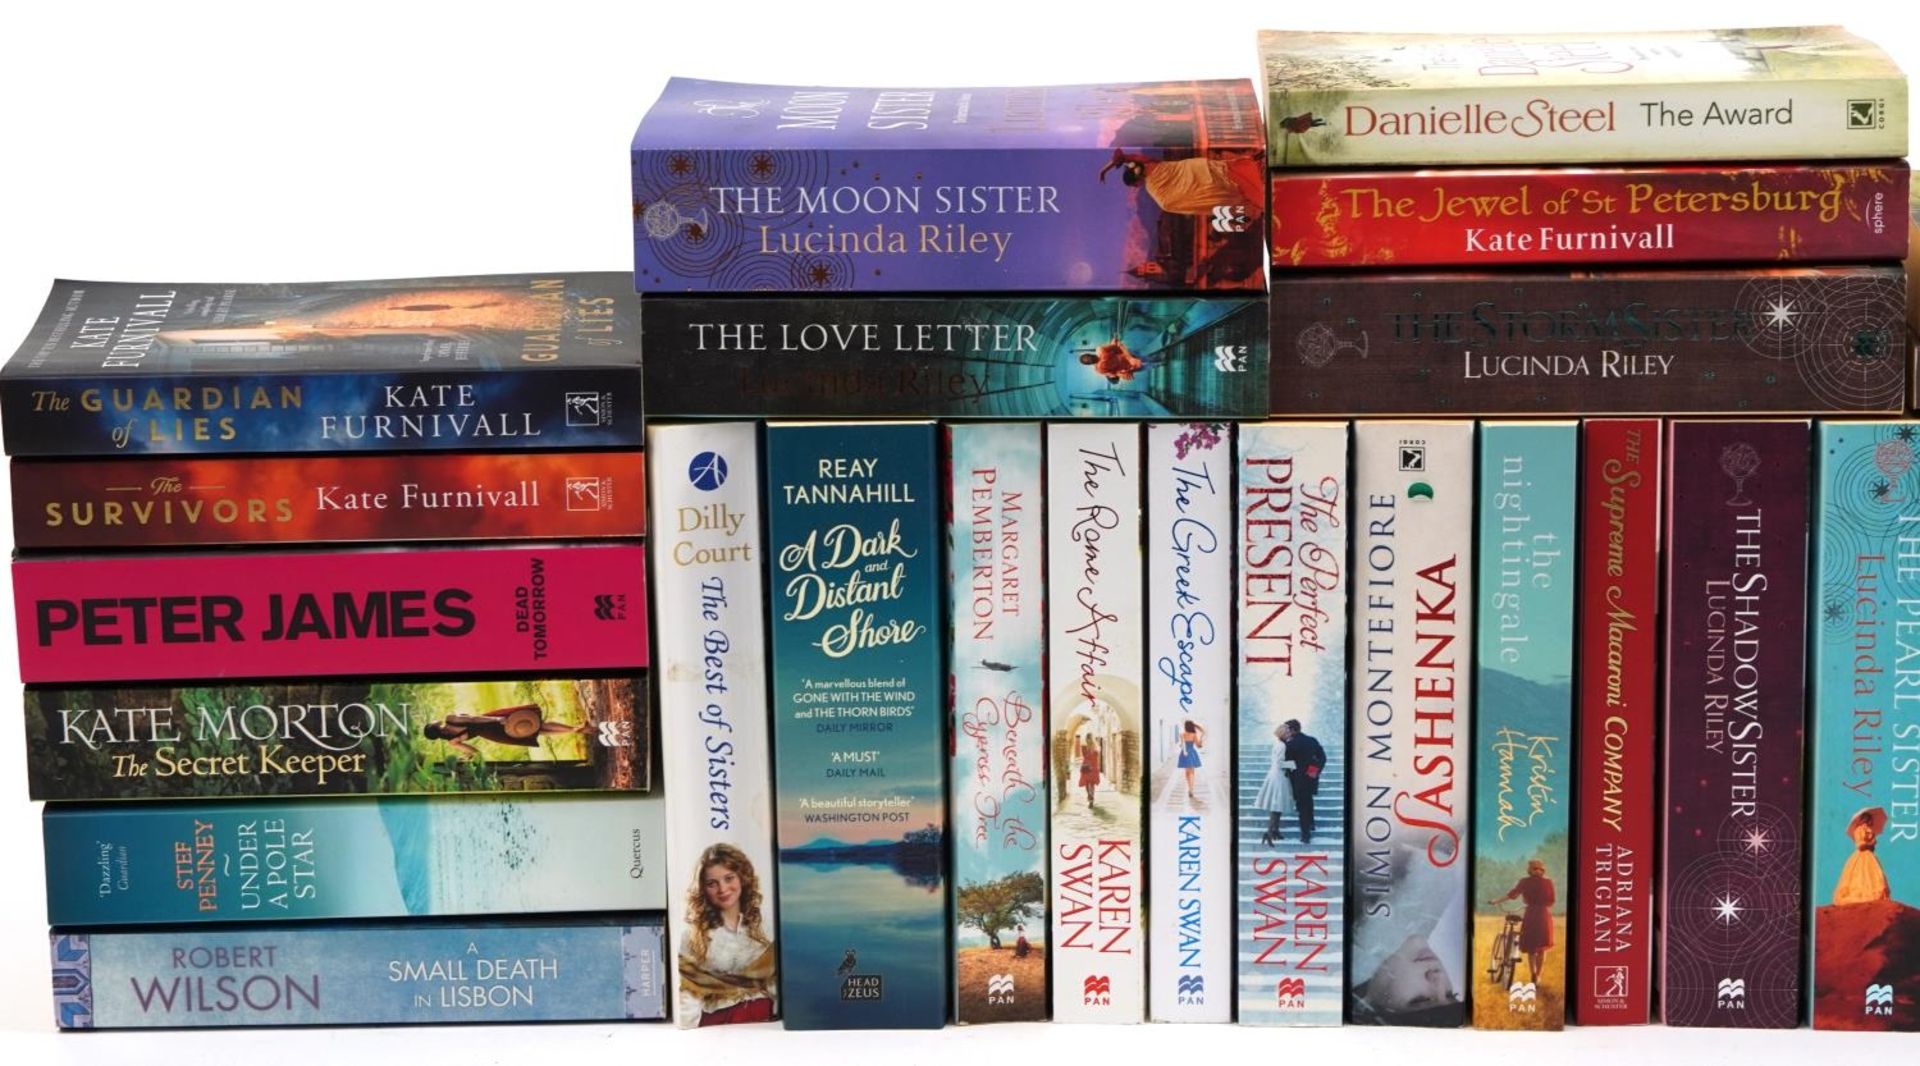 Assorted paperback novels including Simon Montefiore, Robert Wilson, Lucinda Riley and Kate - Image 2 of 3